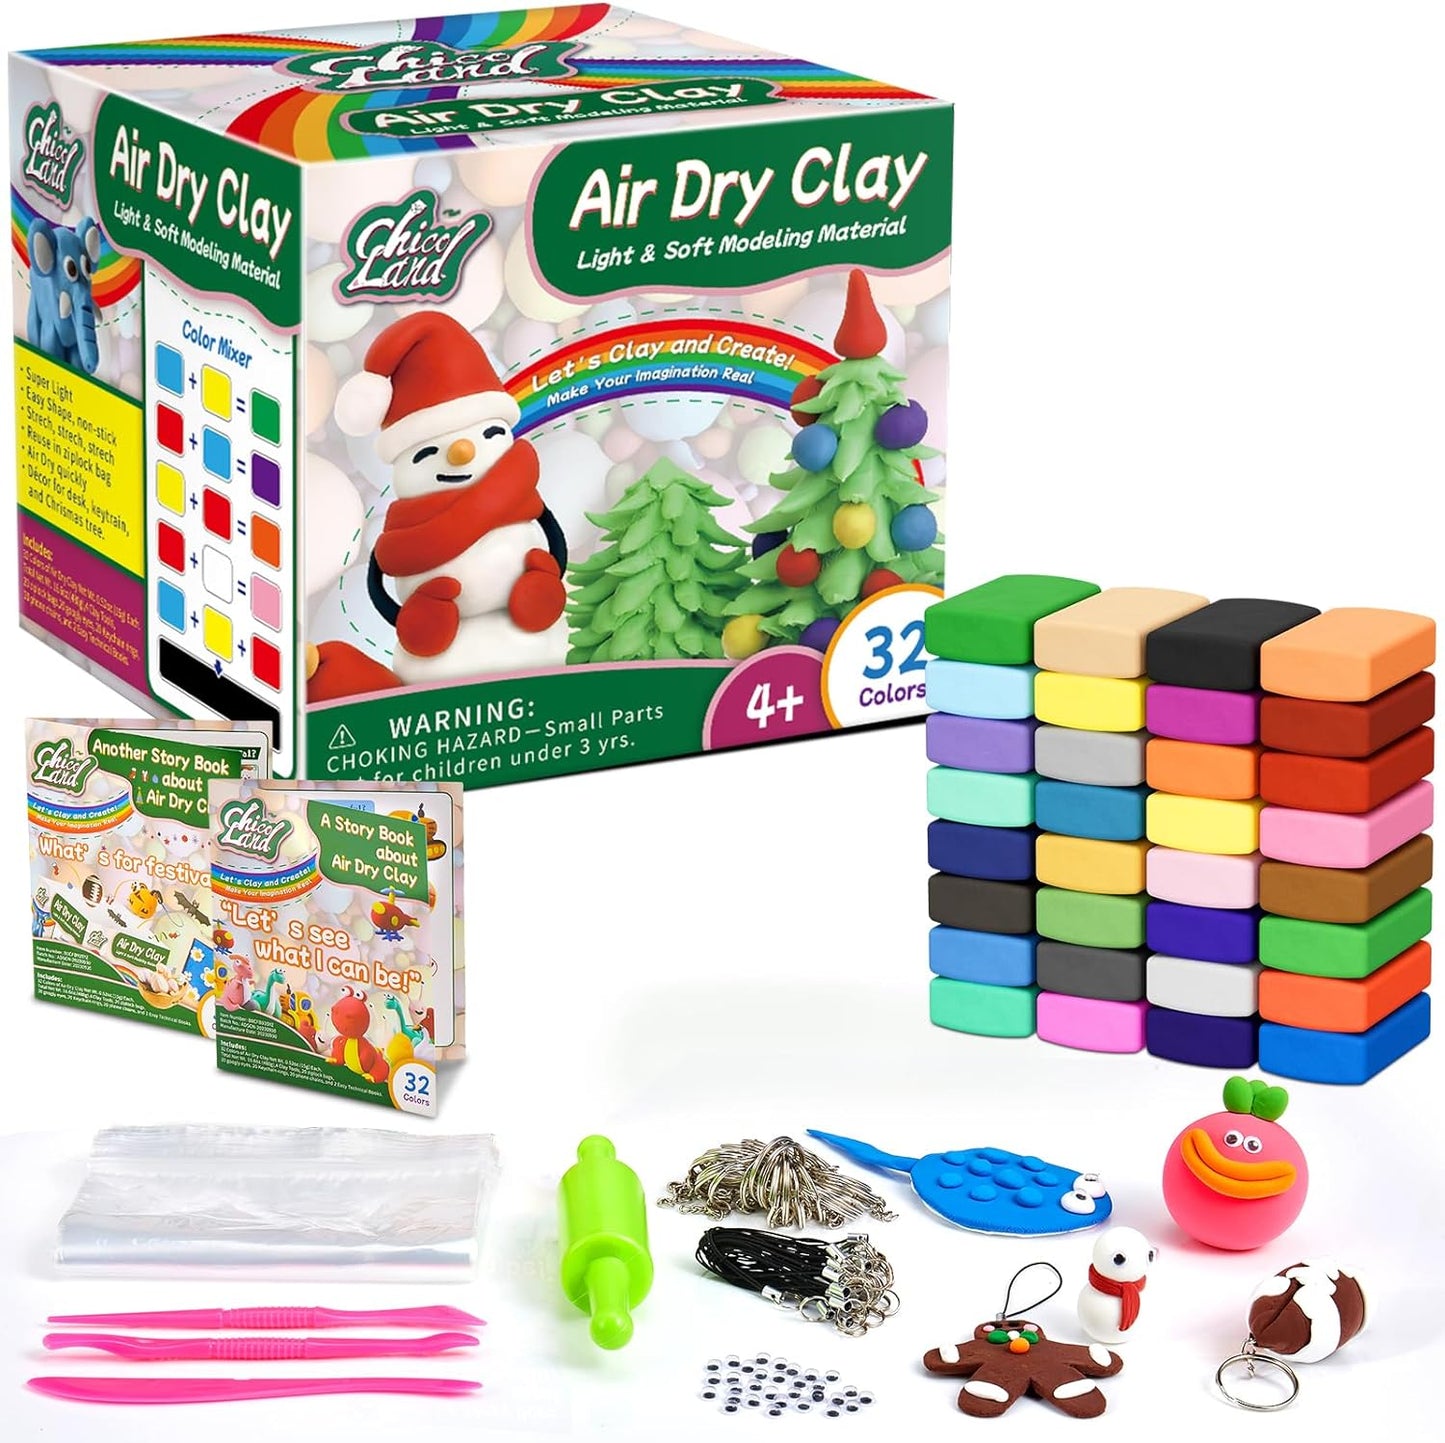 Chico Land Clay Kit - 32 Colors Air Dry Clay, Gift for Boys & Girls Age 4+ Year Old, DIY Model Modeling Clay kit for Kids, with Sculpting Tools, Decoration Accessories, Kids Art Crafts